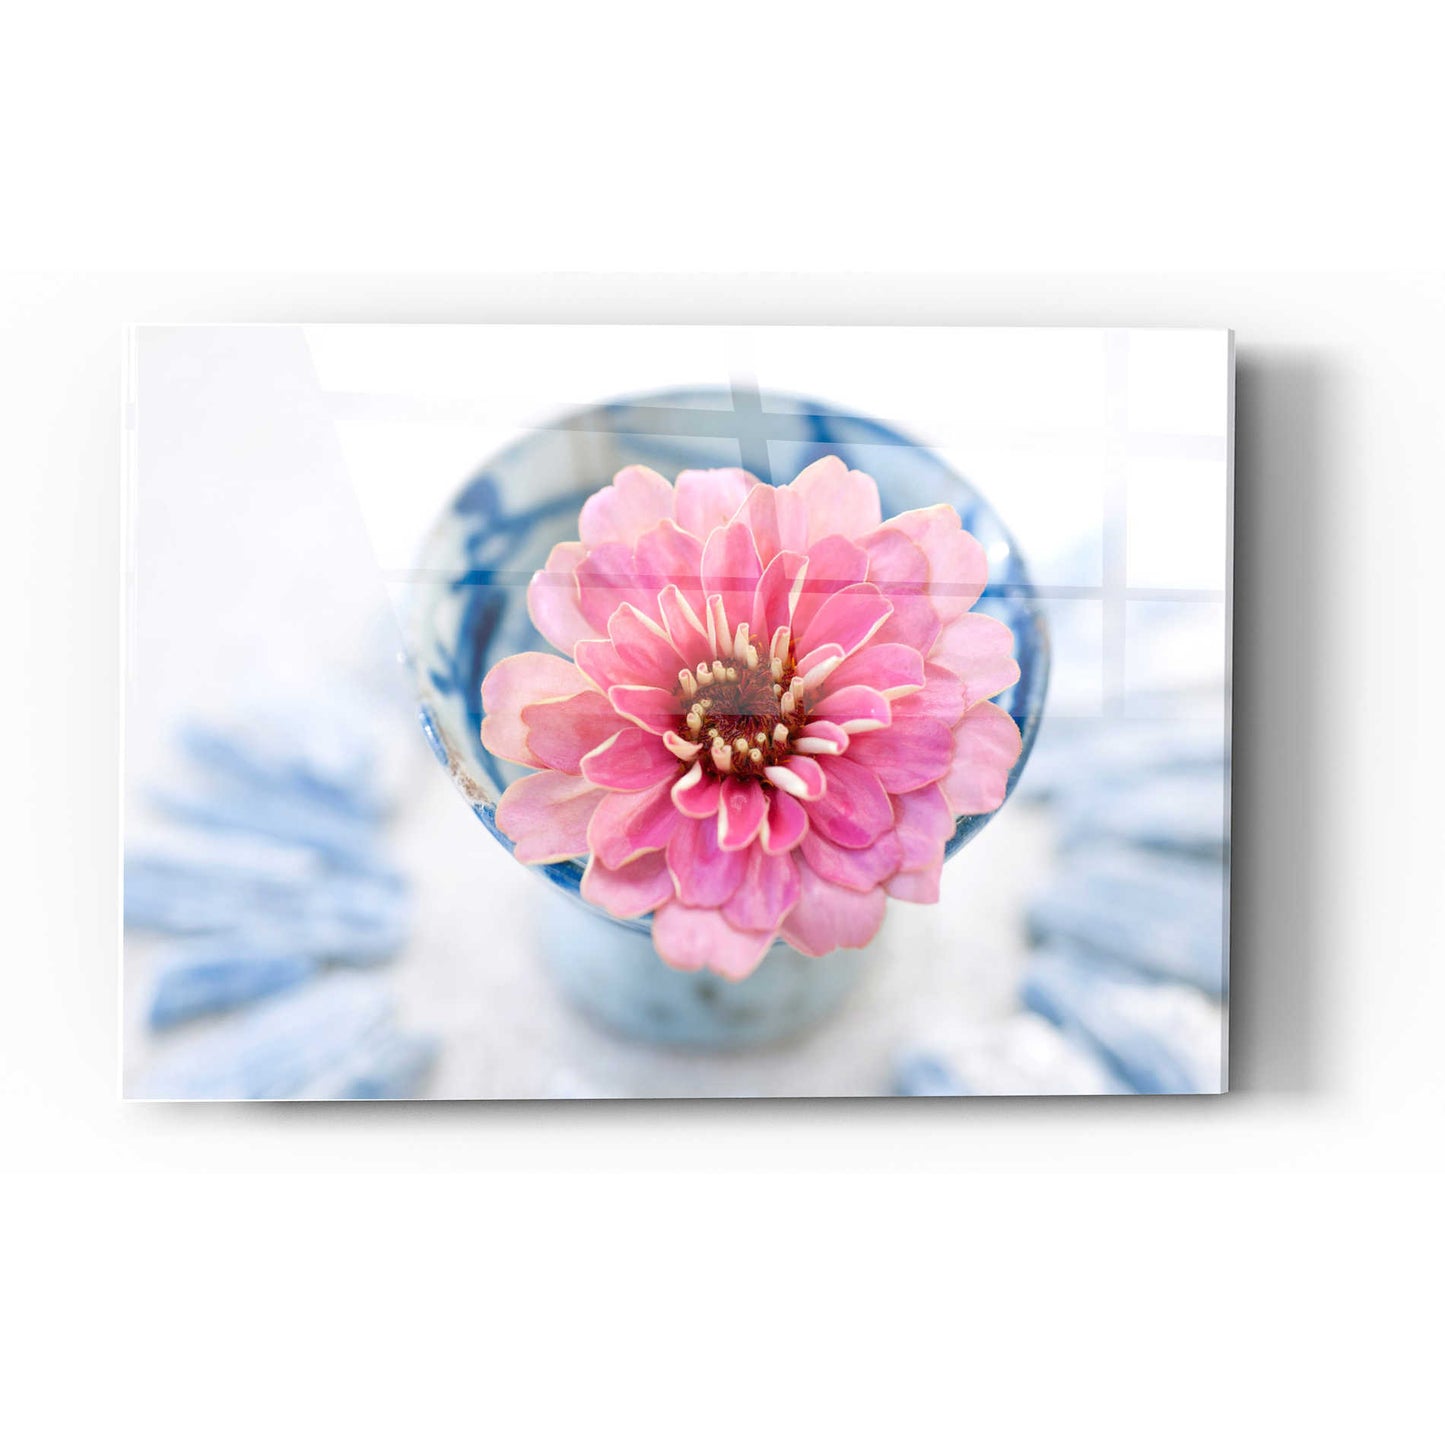 Epic Art 'Pink Flower in a Saké Cup' by Elena Ray Acrylic Glass Wall Art,24x36